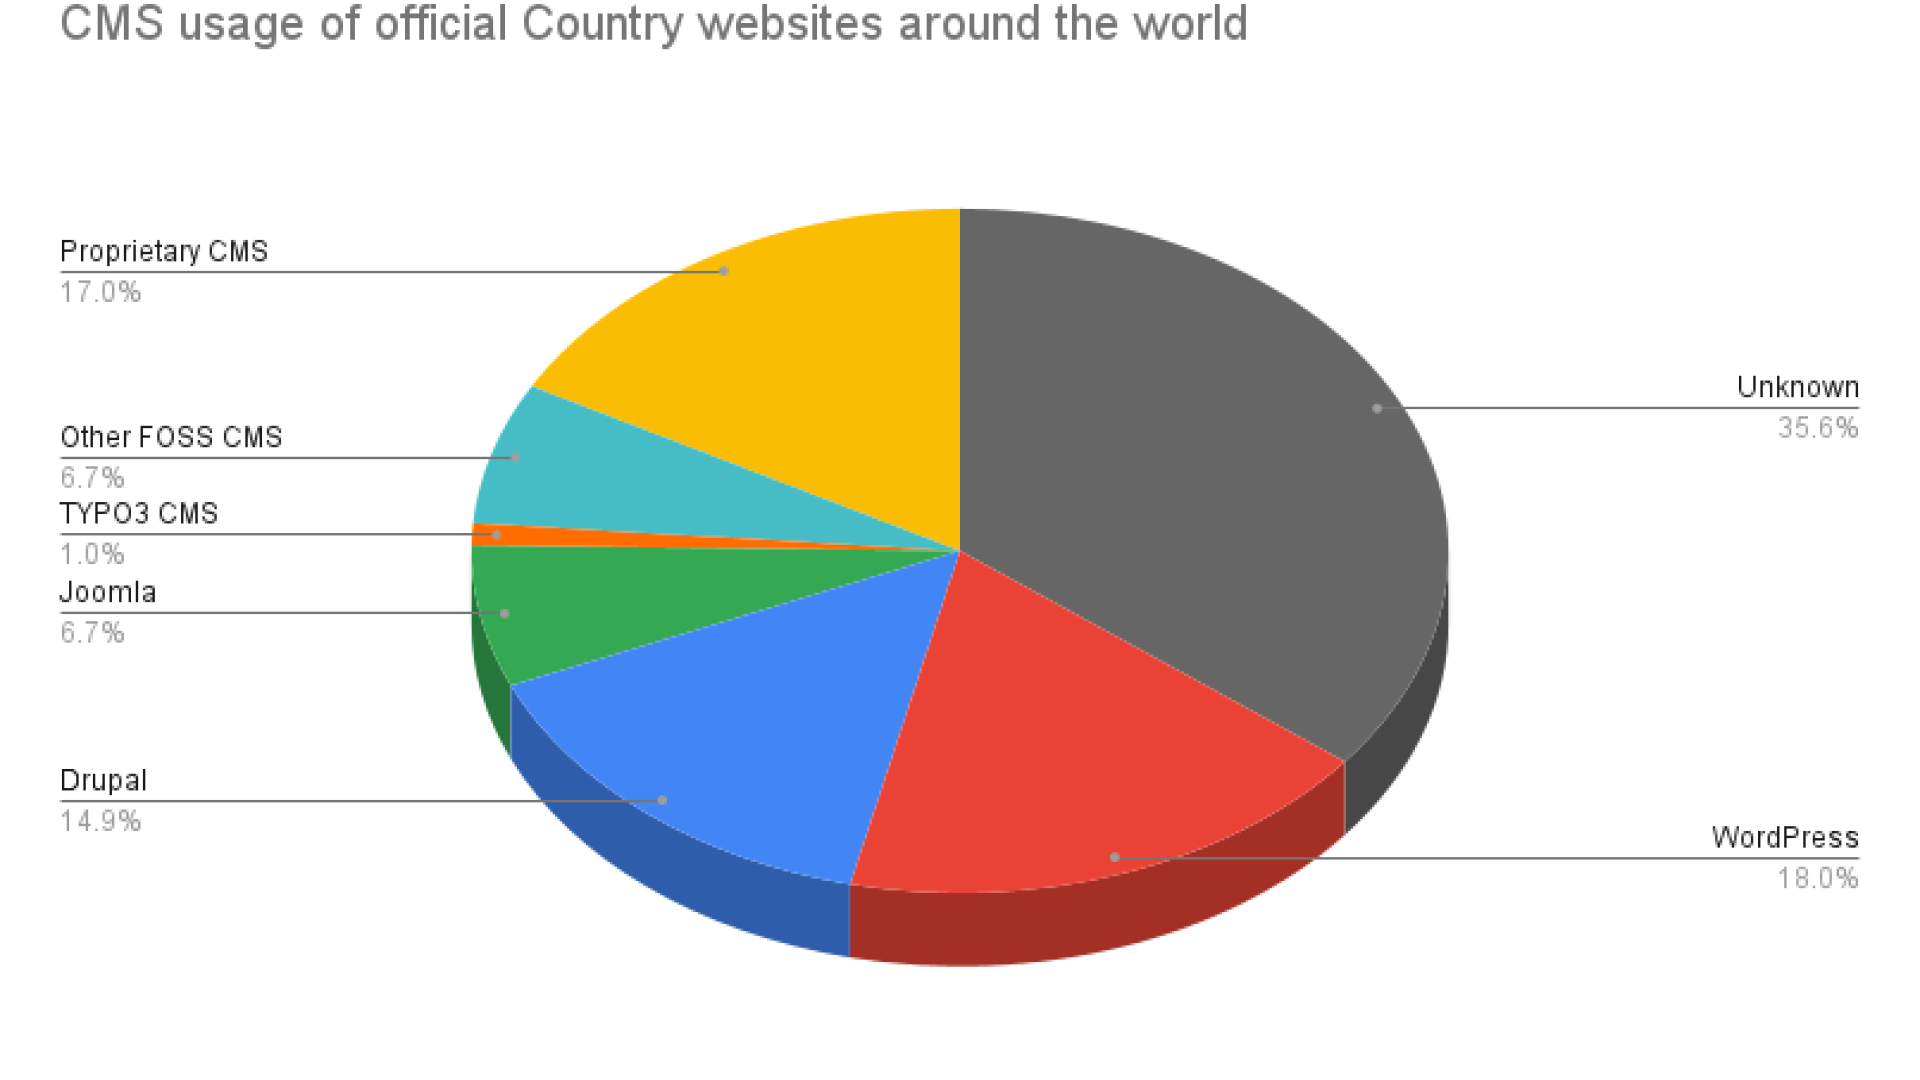 CMS usage of official national websites around the world